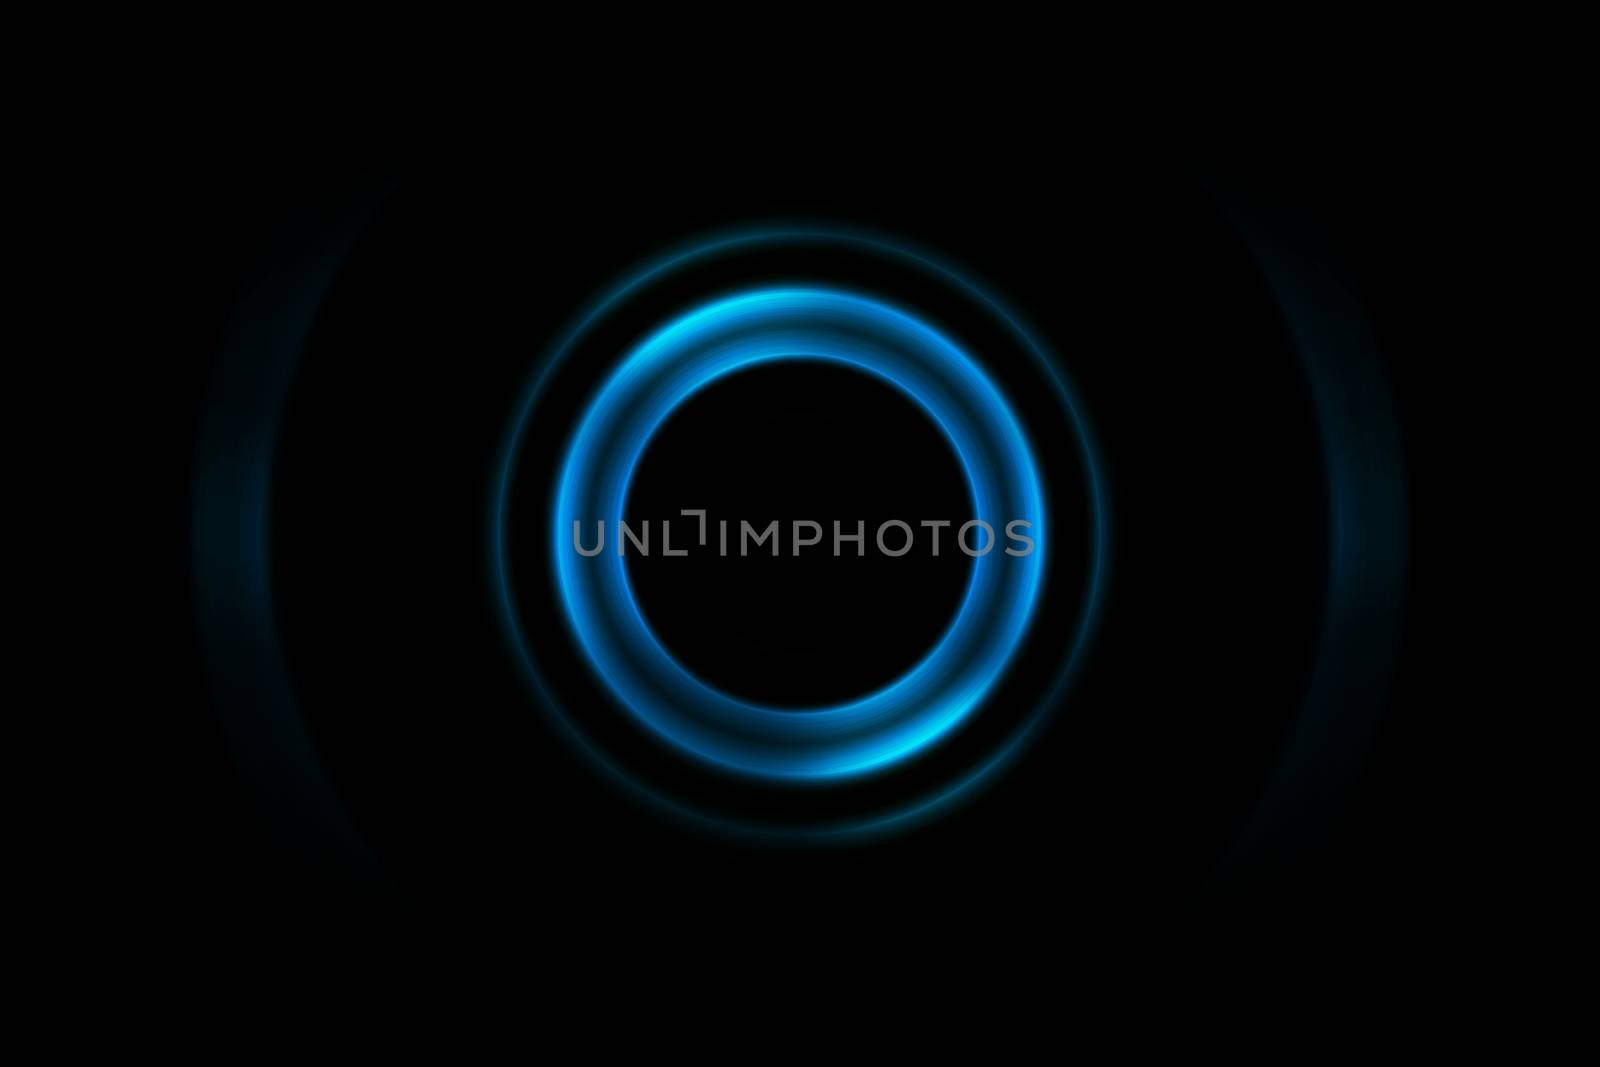 Abstract light blue ring with sound waves oscillating background by mouu007